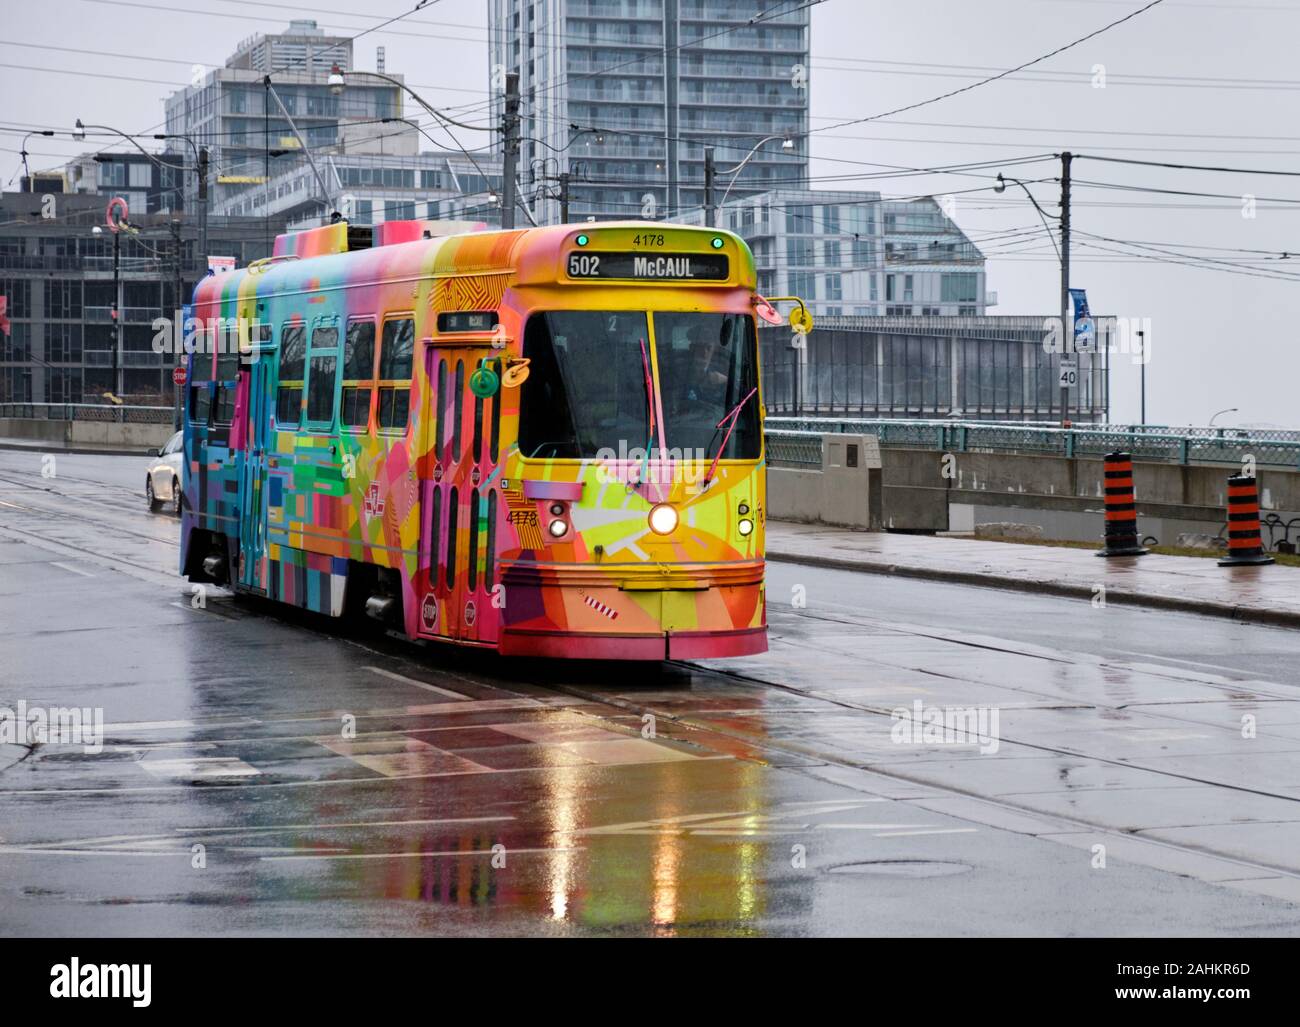 CLRV 4178 “A Streetcar Named Toronto.” Repainted Streetcar to celebrate the end of service of the Icon on the Streets of Toronto Stock Photo